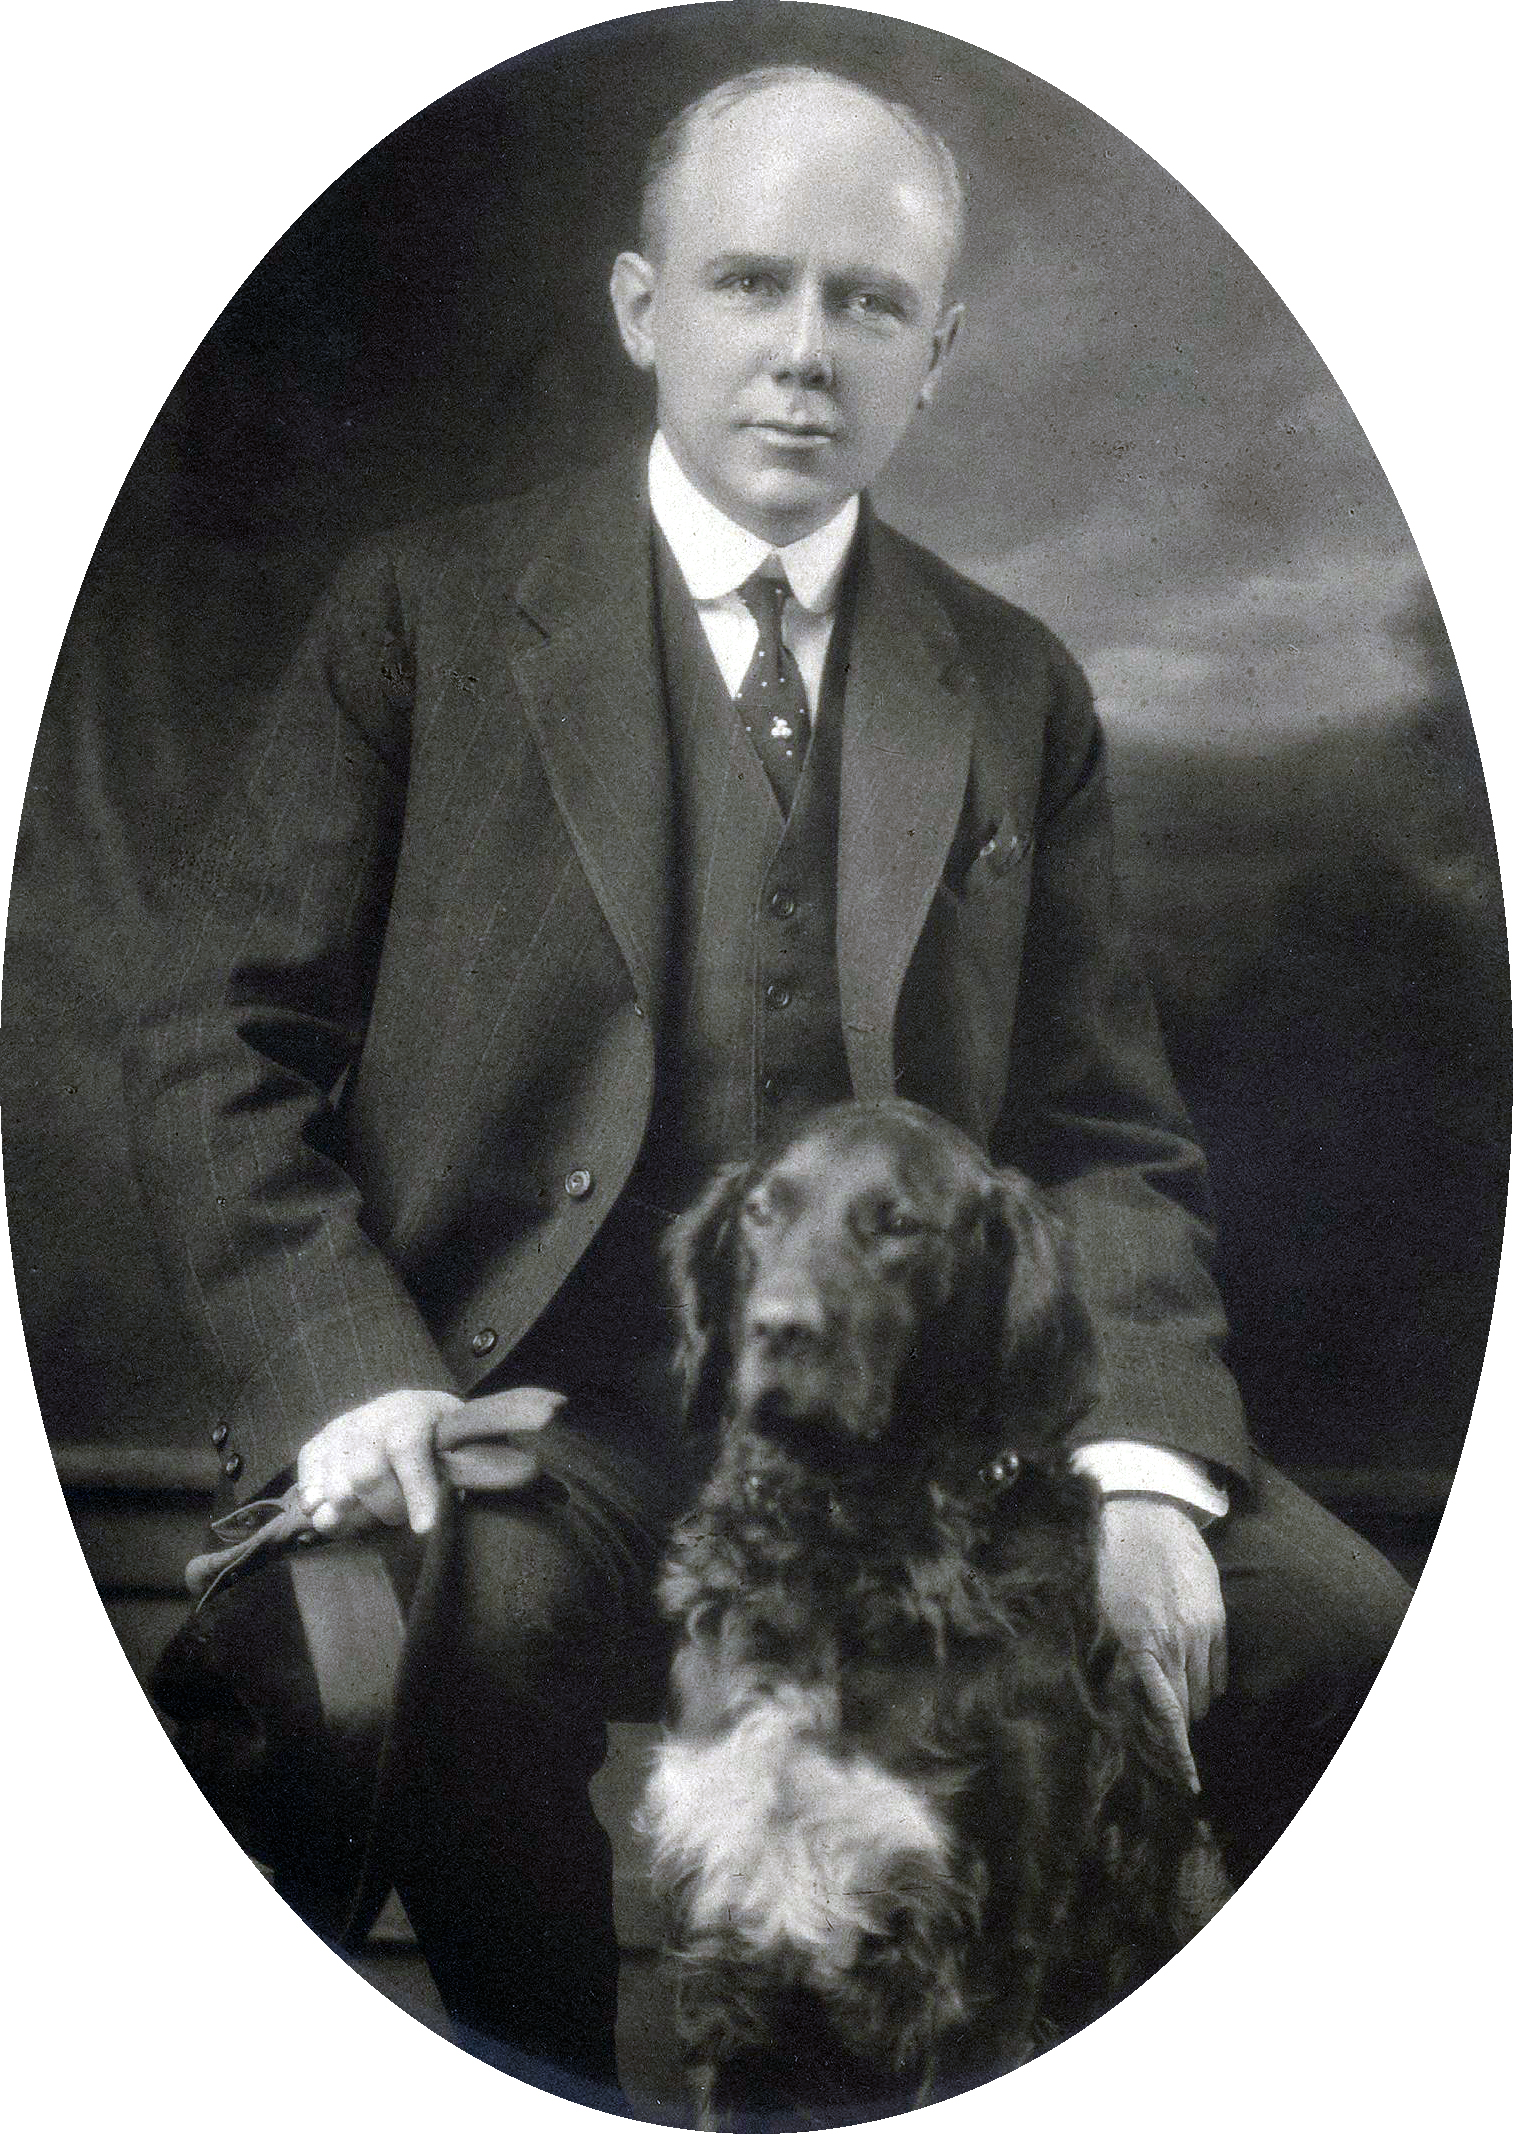 black and white photograph of Percival Proctor Baxter seated, wearing a suit and tie as irish setter, Garry sits in front of him